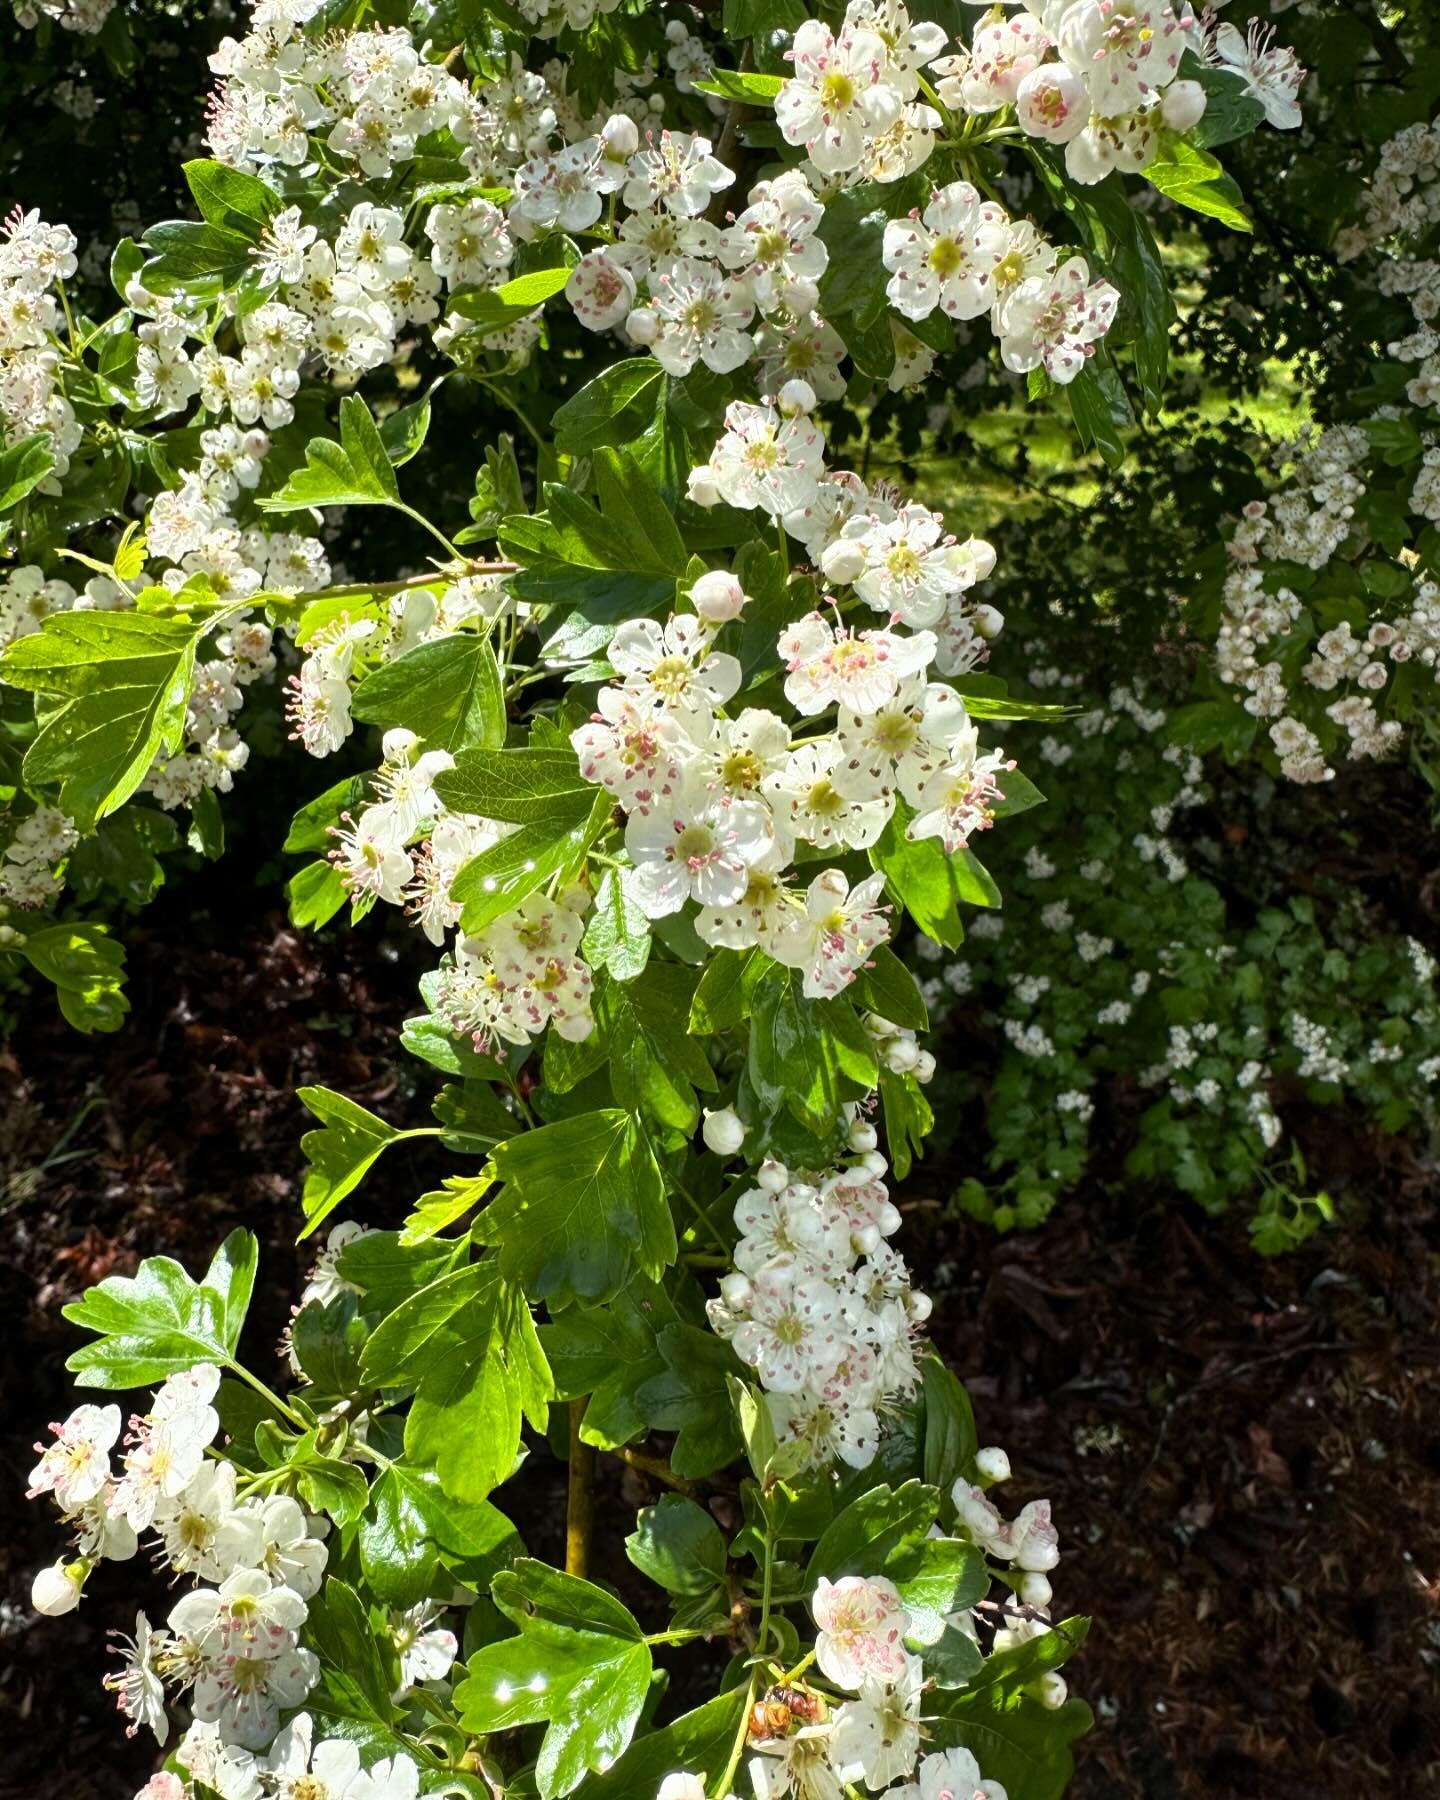 Featured Plant Friday - Common Hawthorn - Hawthorn is a flowering shrub in the rose family. The hawthorn leaves, berries, and flowers are used as medicine. They contain chemicals called flavonoids, which have antioxidant effects. Hawthorn also seems 